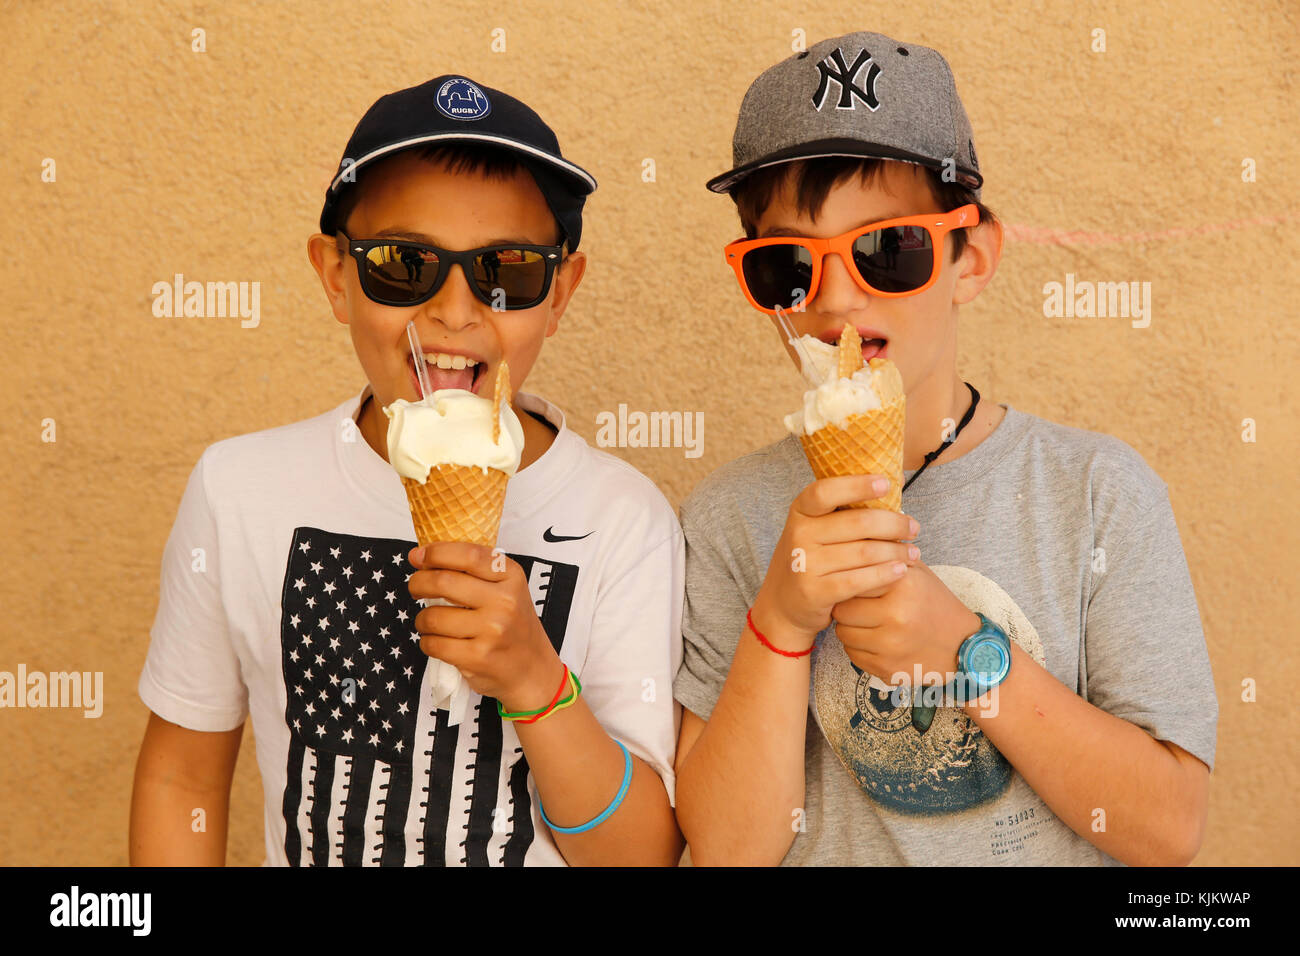 10-year-old boys eating ice creams. Marseilles. France. Stock Photo